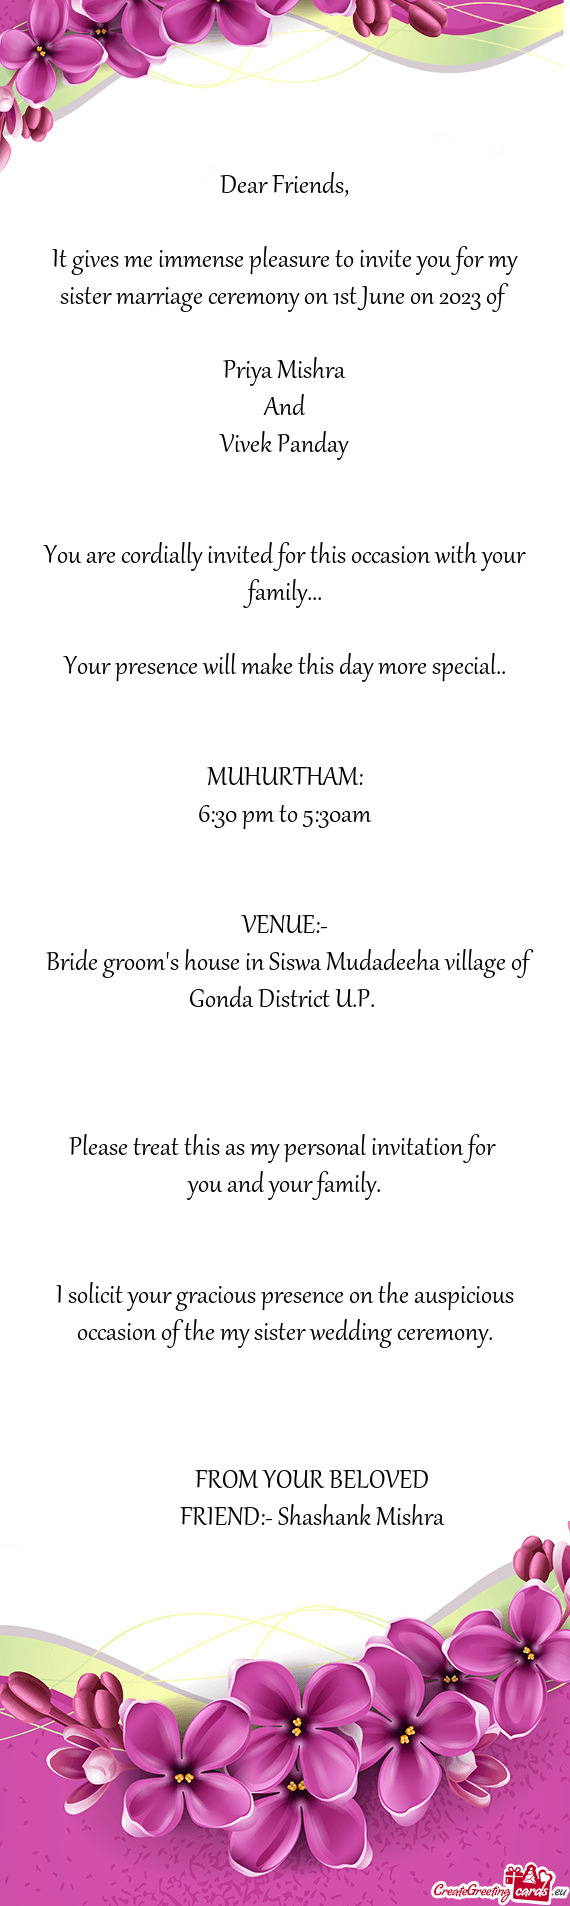 It gives me immense pleasure to invite you for my sister marriage ceremony on 1st June on 2023 of